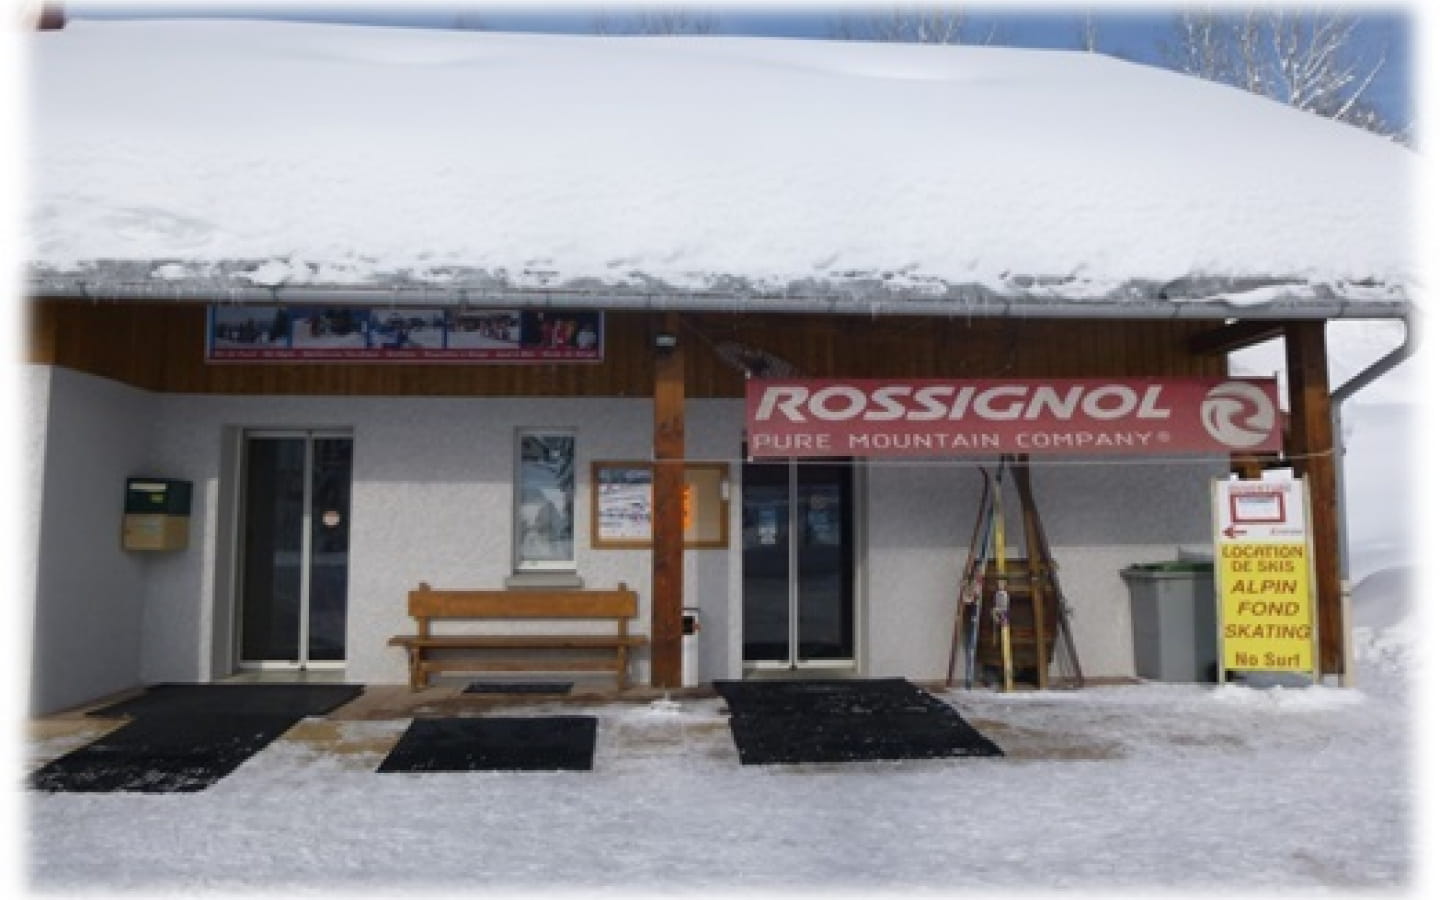 Location Bourgeois skis & raquettes